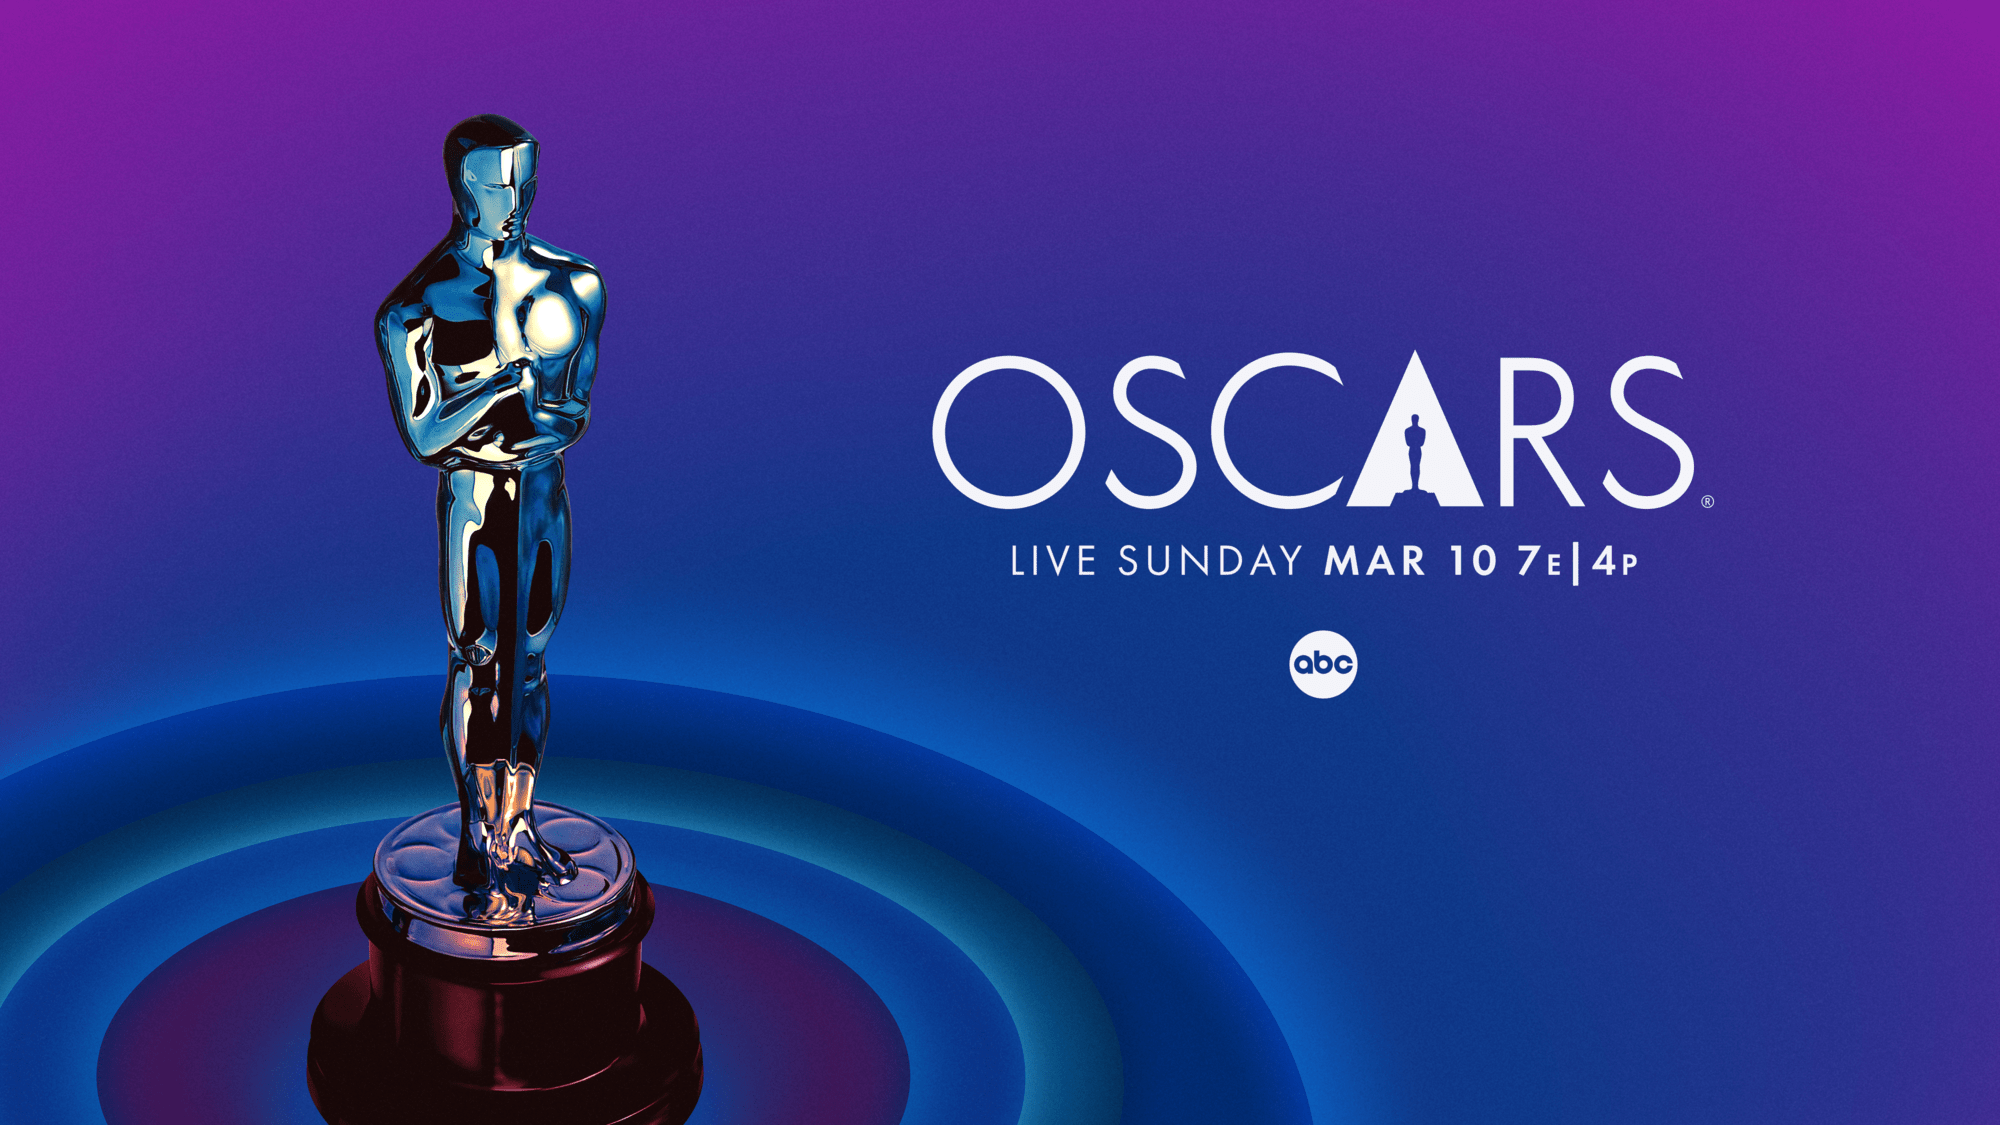 MORE STARS TAKE THE STAGE TO PRESENT AT THE 96TH OSCARS®